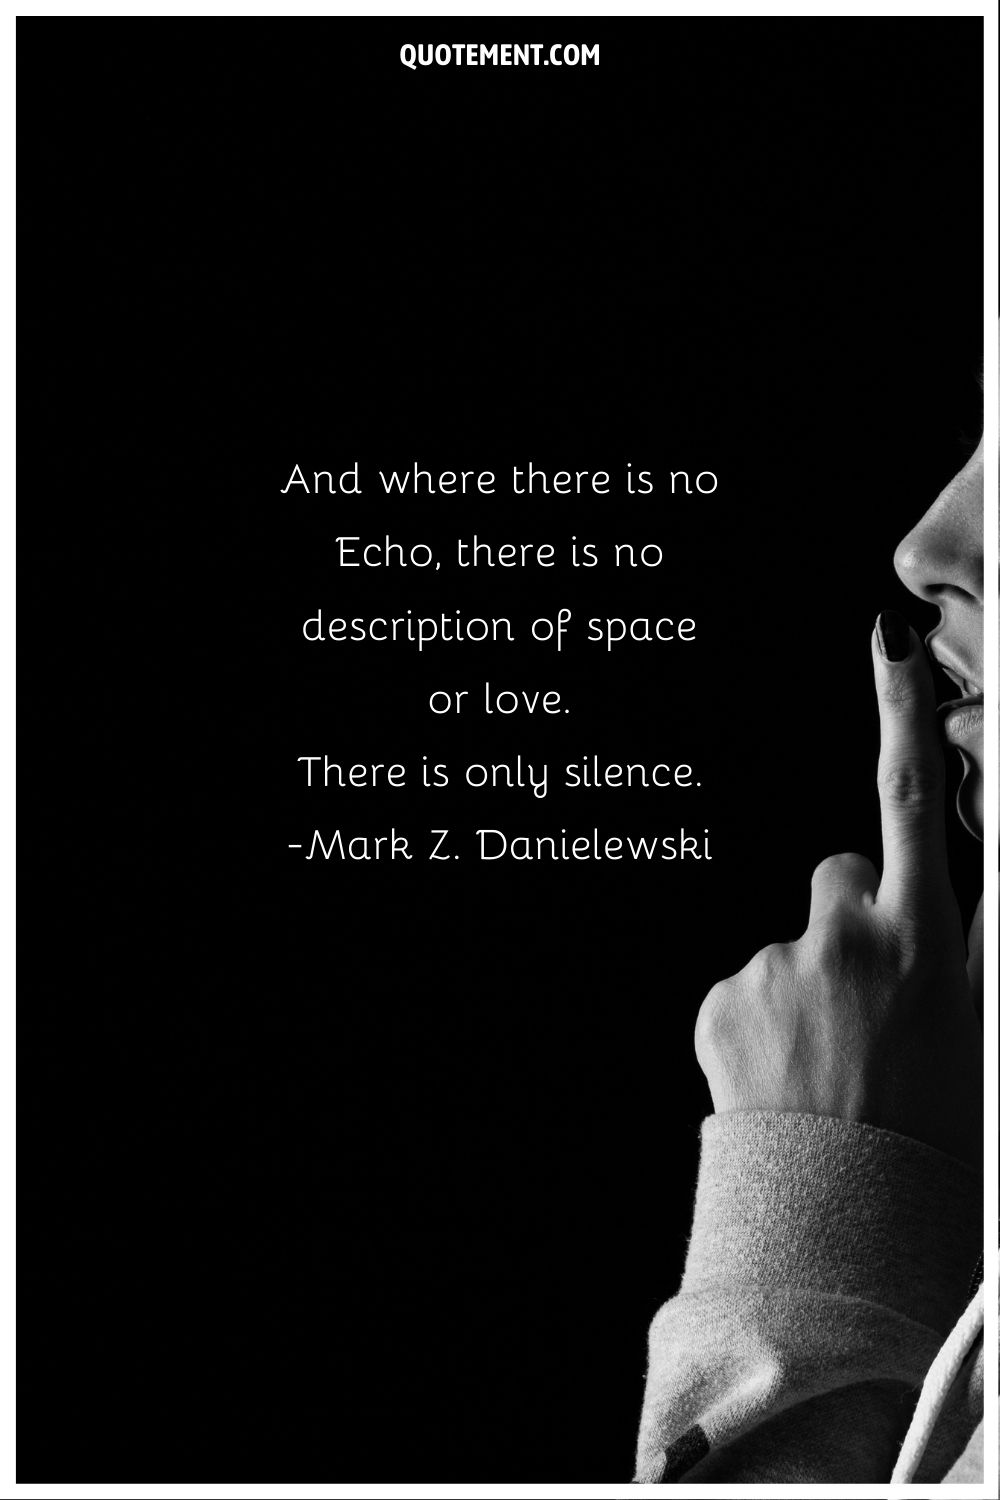 “And where there is no Echo, there is no description of space or love. There is only silence.” ― Mark Z. Danielewski, House of Leaves